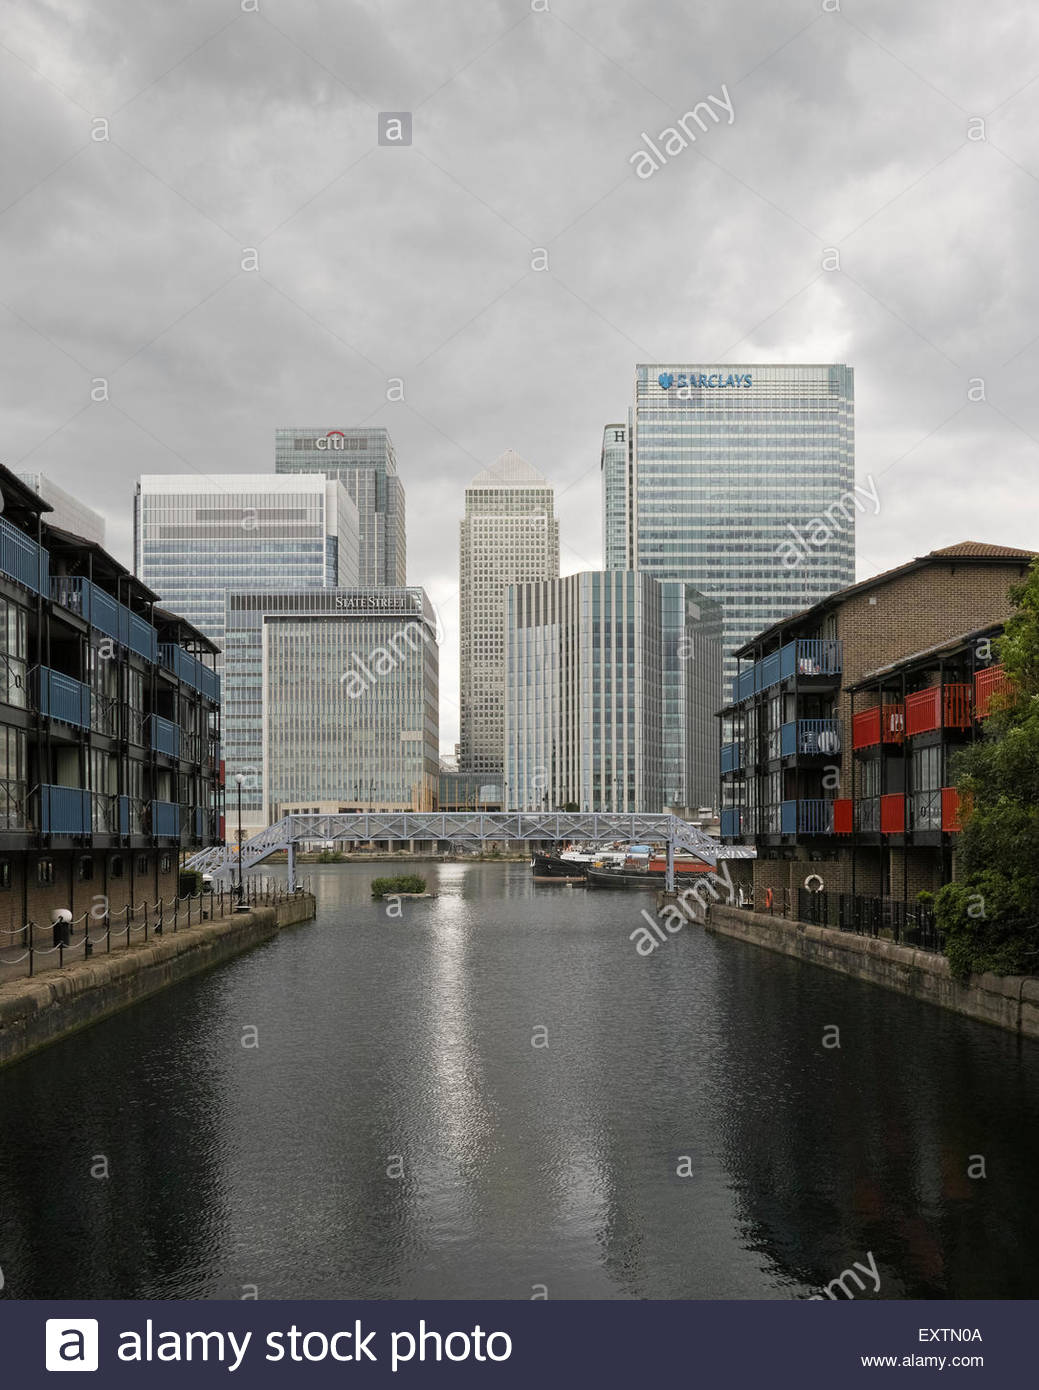 view-of-canary-wharf-estate-from-blackwa